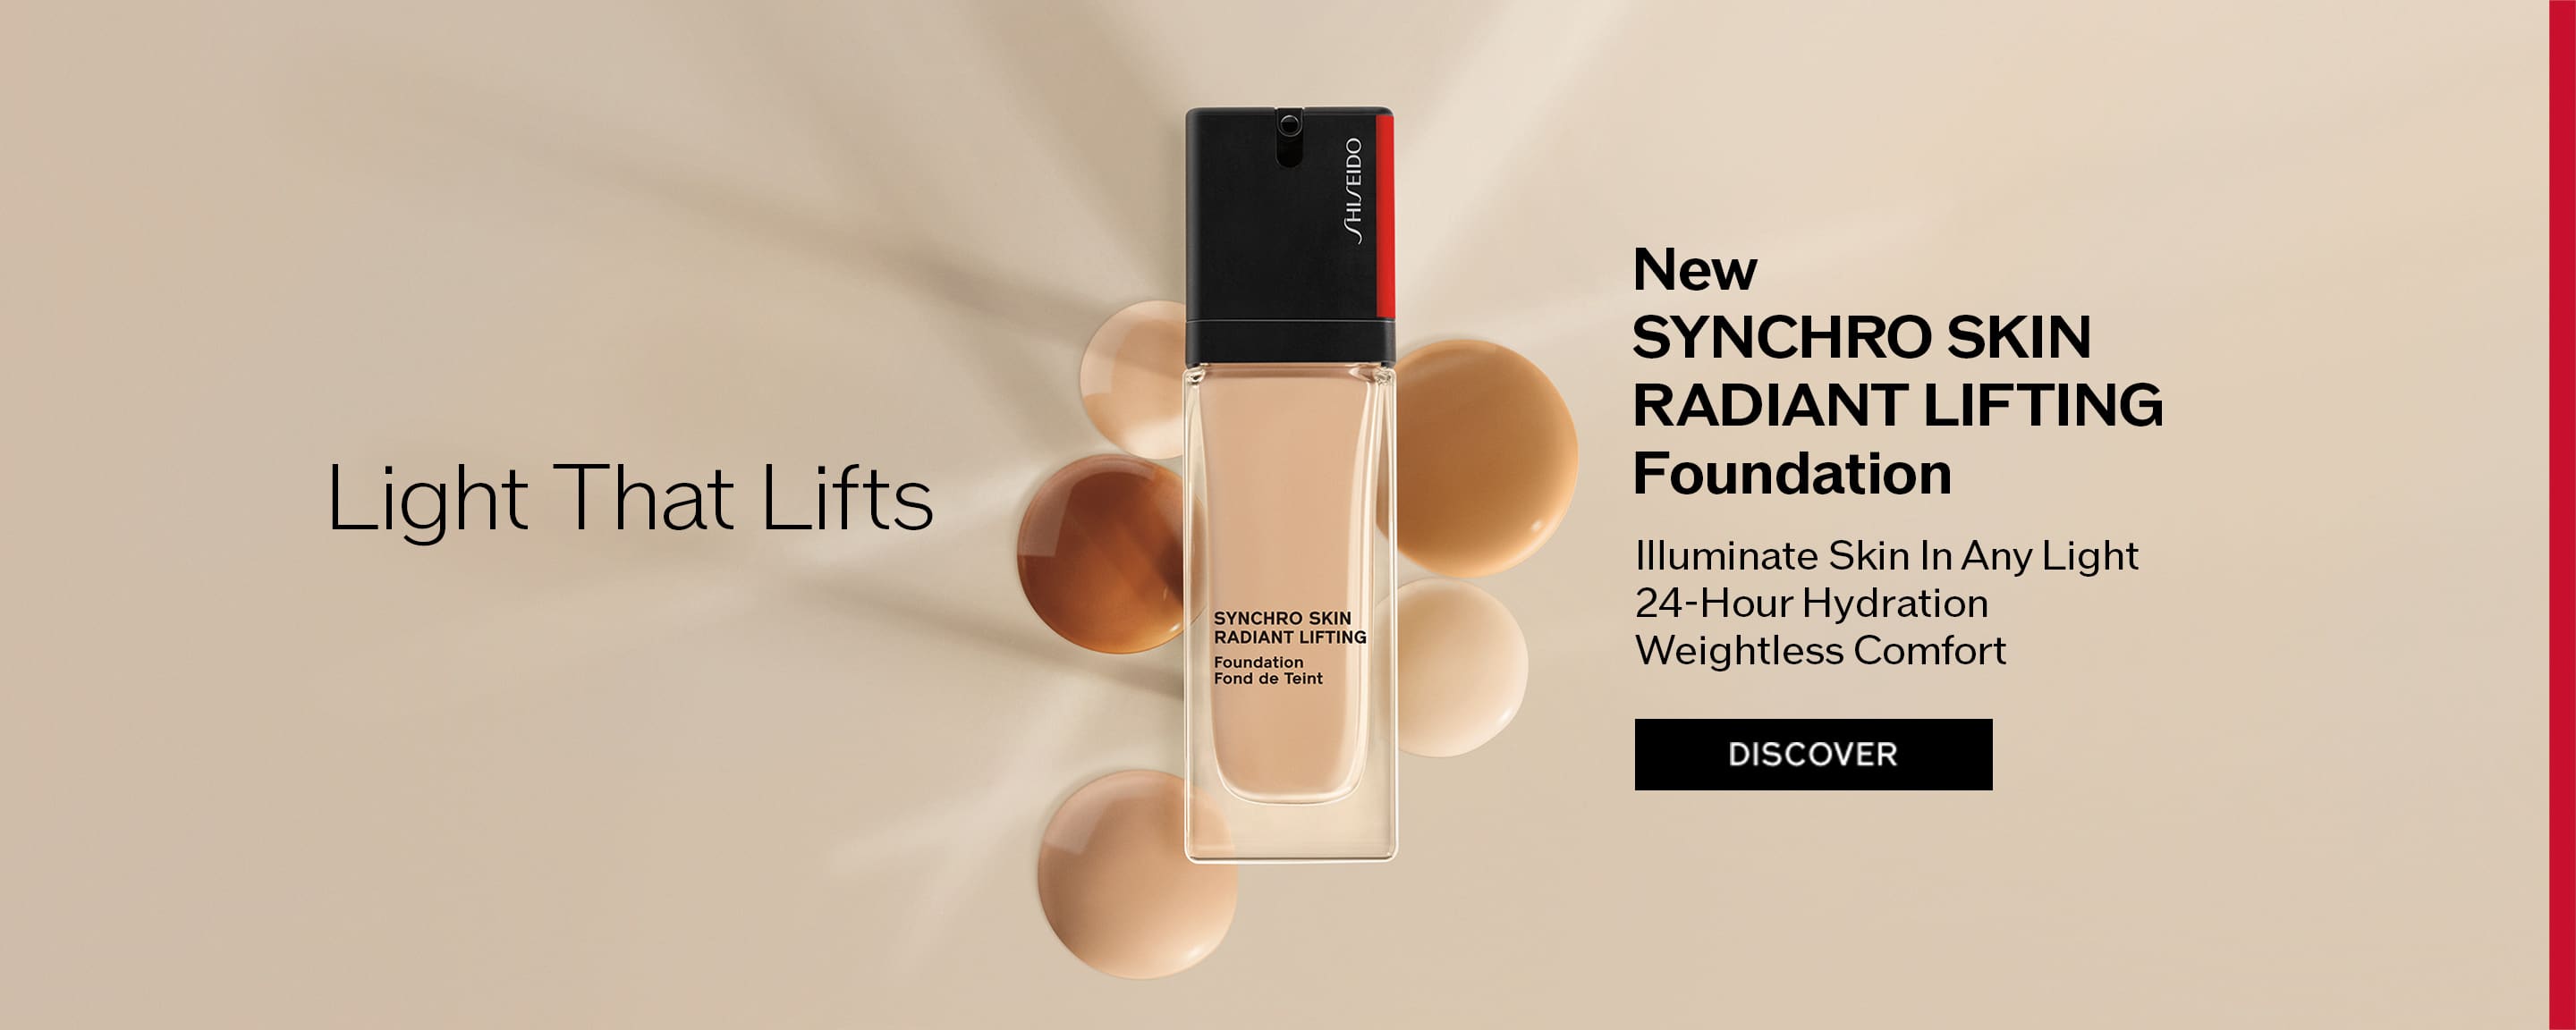 Light That Lifts New SYNCHRO SKINRADIANT LIFTING Foundation Illuminate Skin In Any Light 24-Hour Hydration Weightless Comfort